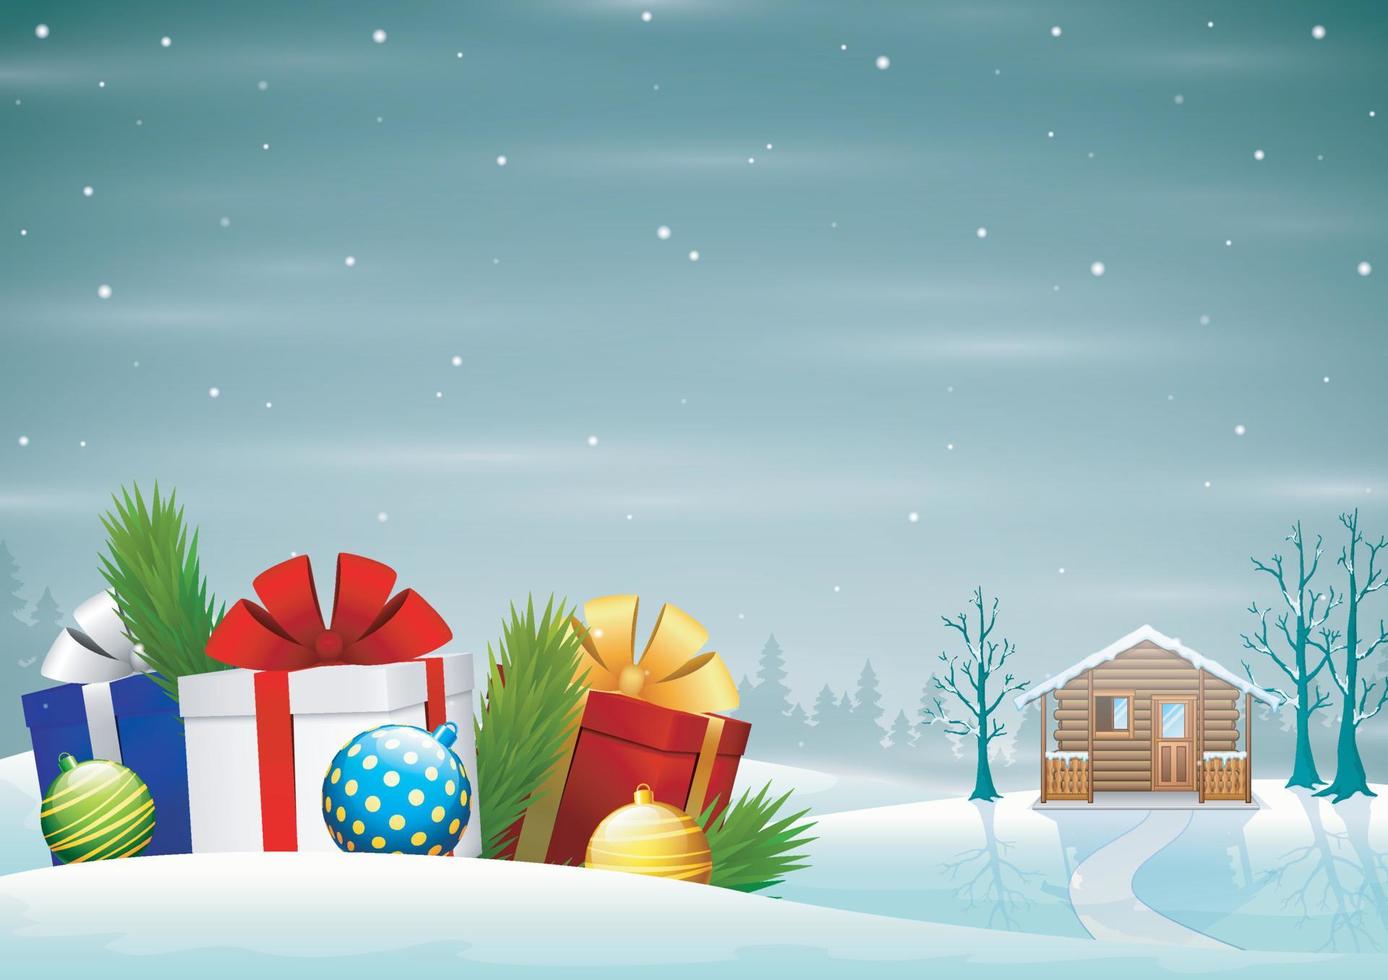 Christmas holiday background with colorful gift boxes vector